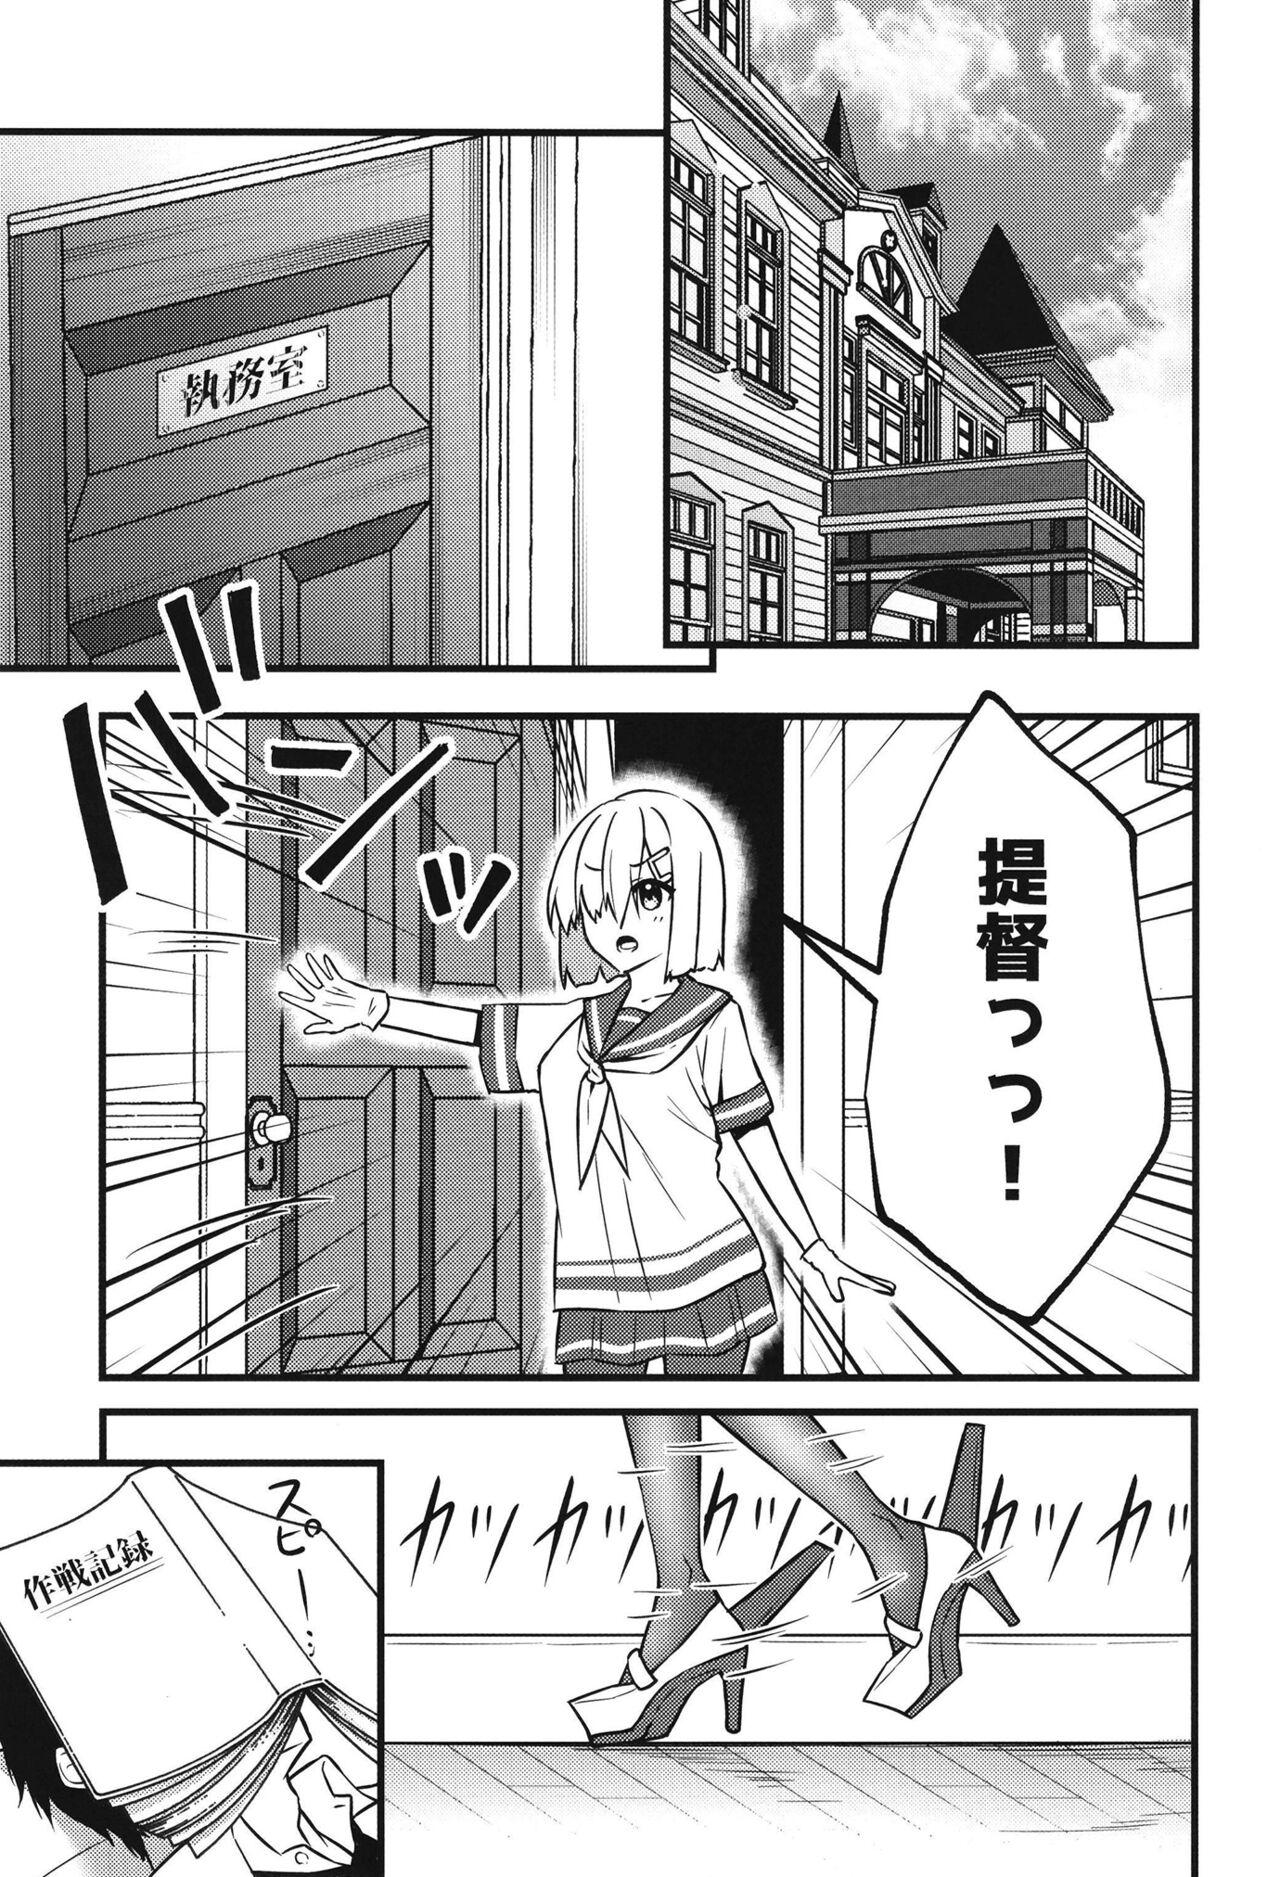 Bwc NOT FOUND - Kantai collection Teenxxx - Page 5